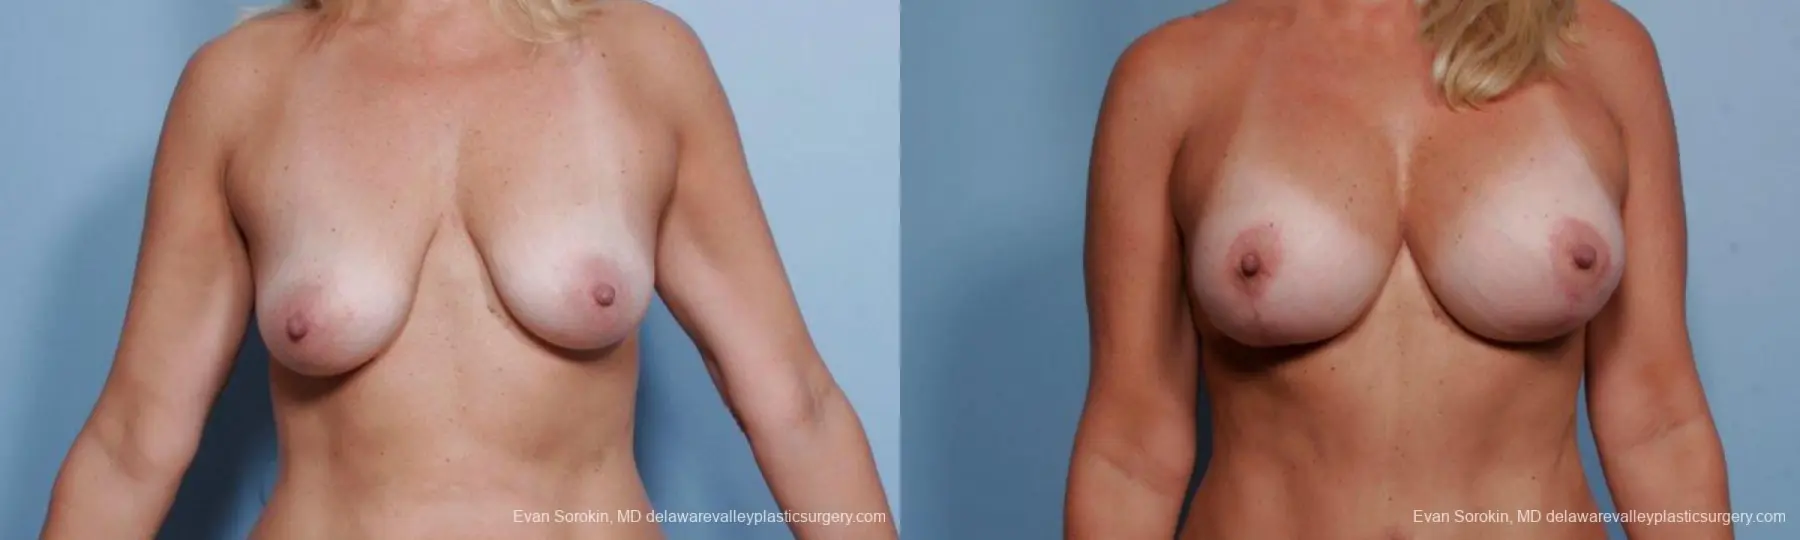 Philadelphia Breast Lift and Augmentation 9375 - Before and After